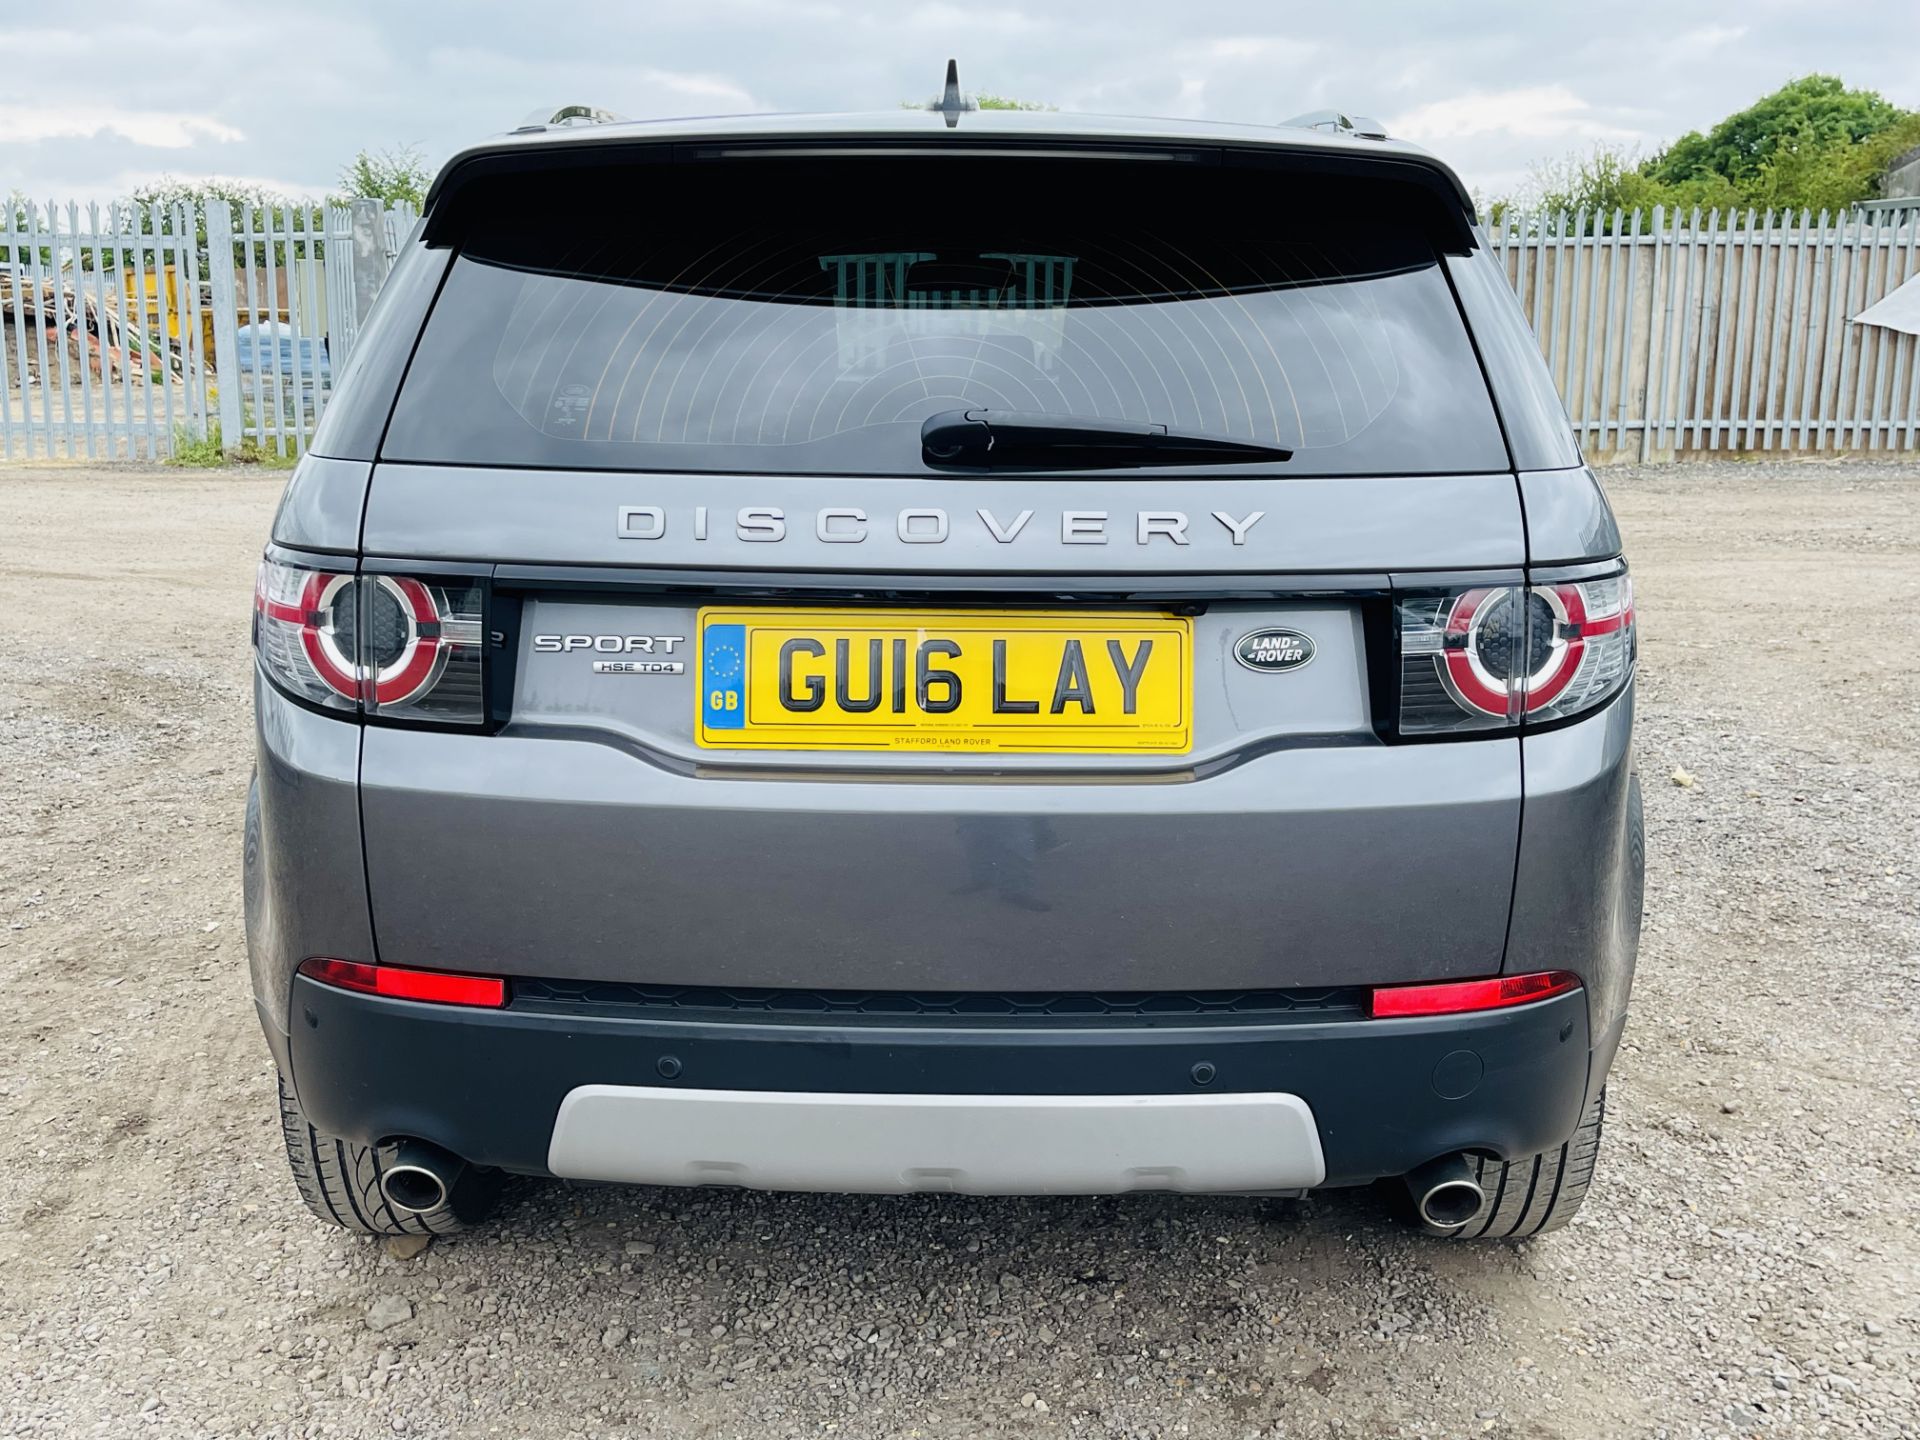 Land Rover Discovery sport 2.0 TD4 HSE - 2016 '16' Reg ' Sat Nav' A/C ' Automatic ' Euro 6b - Image 8 of 36